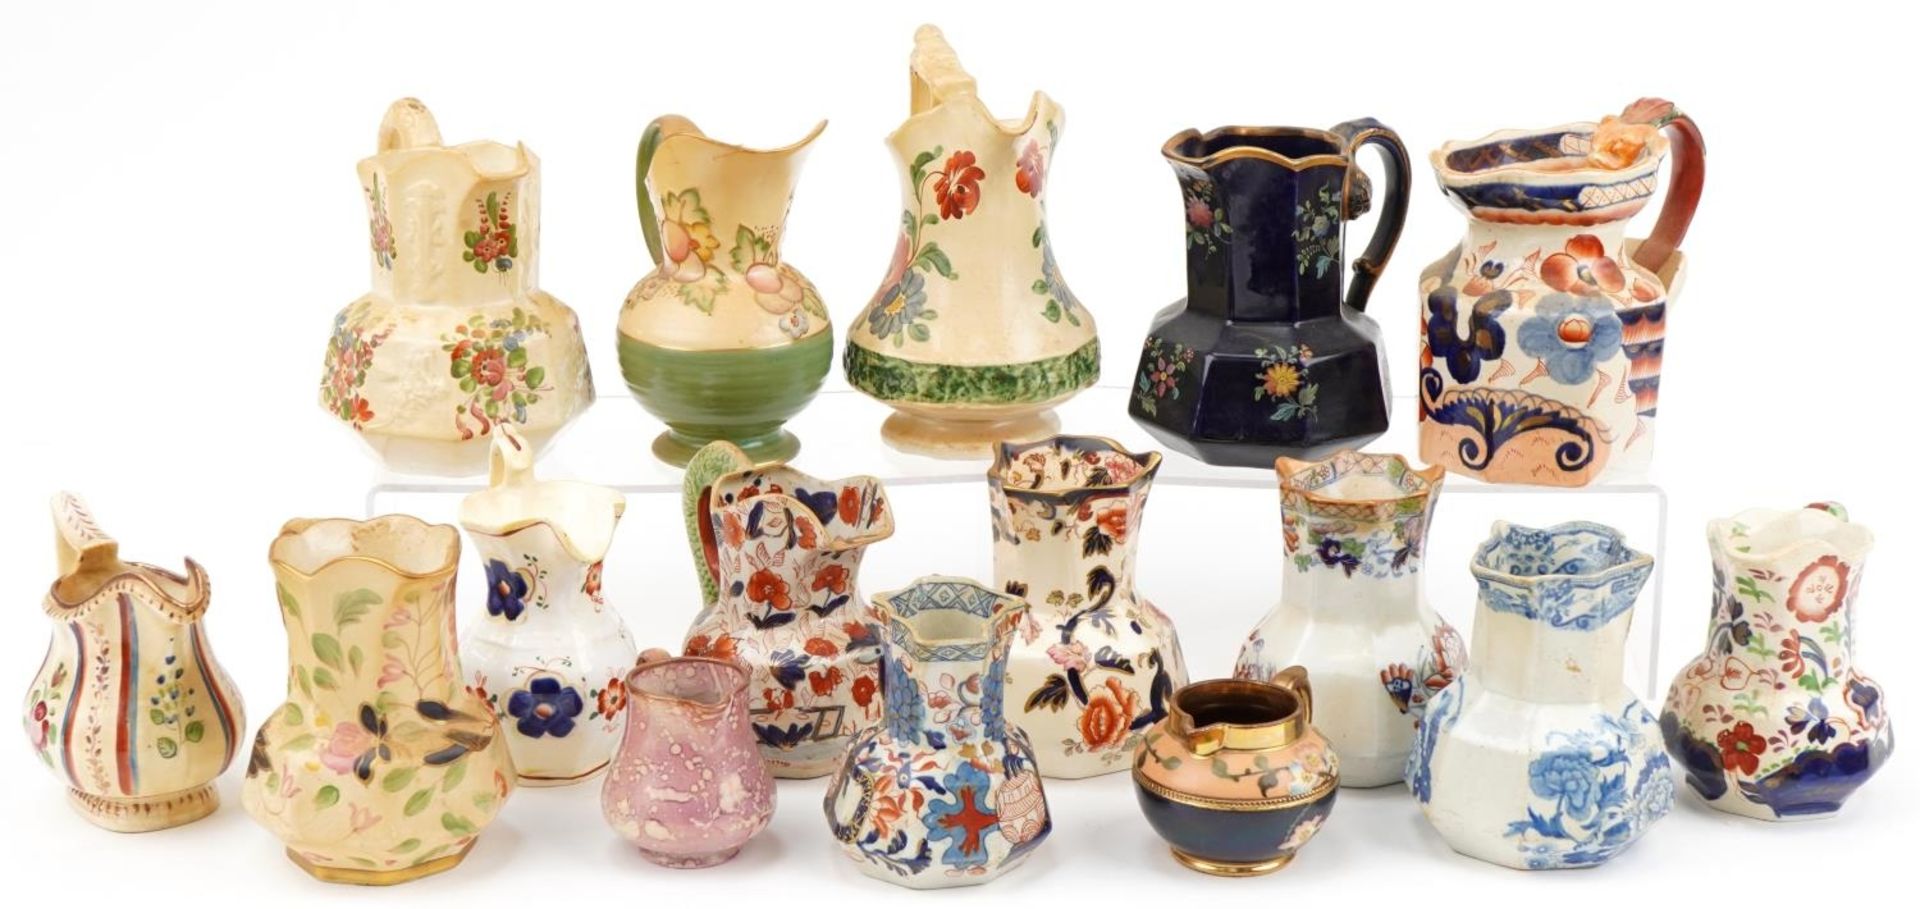 Early 19th century and later jugs including an example hand painted with flowers, cobalt blue glazed